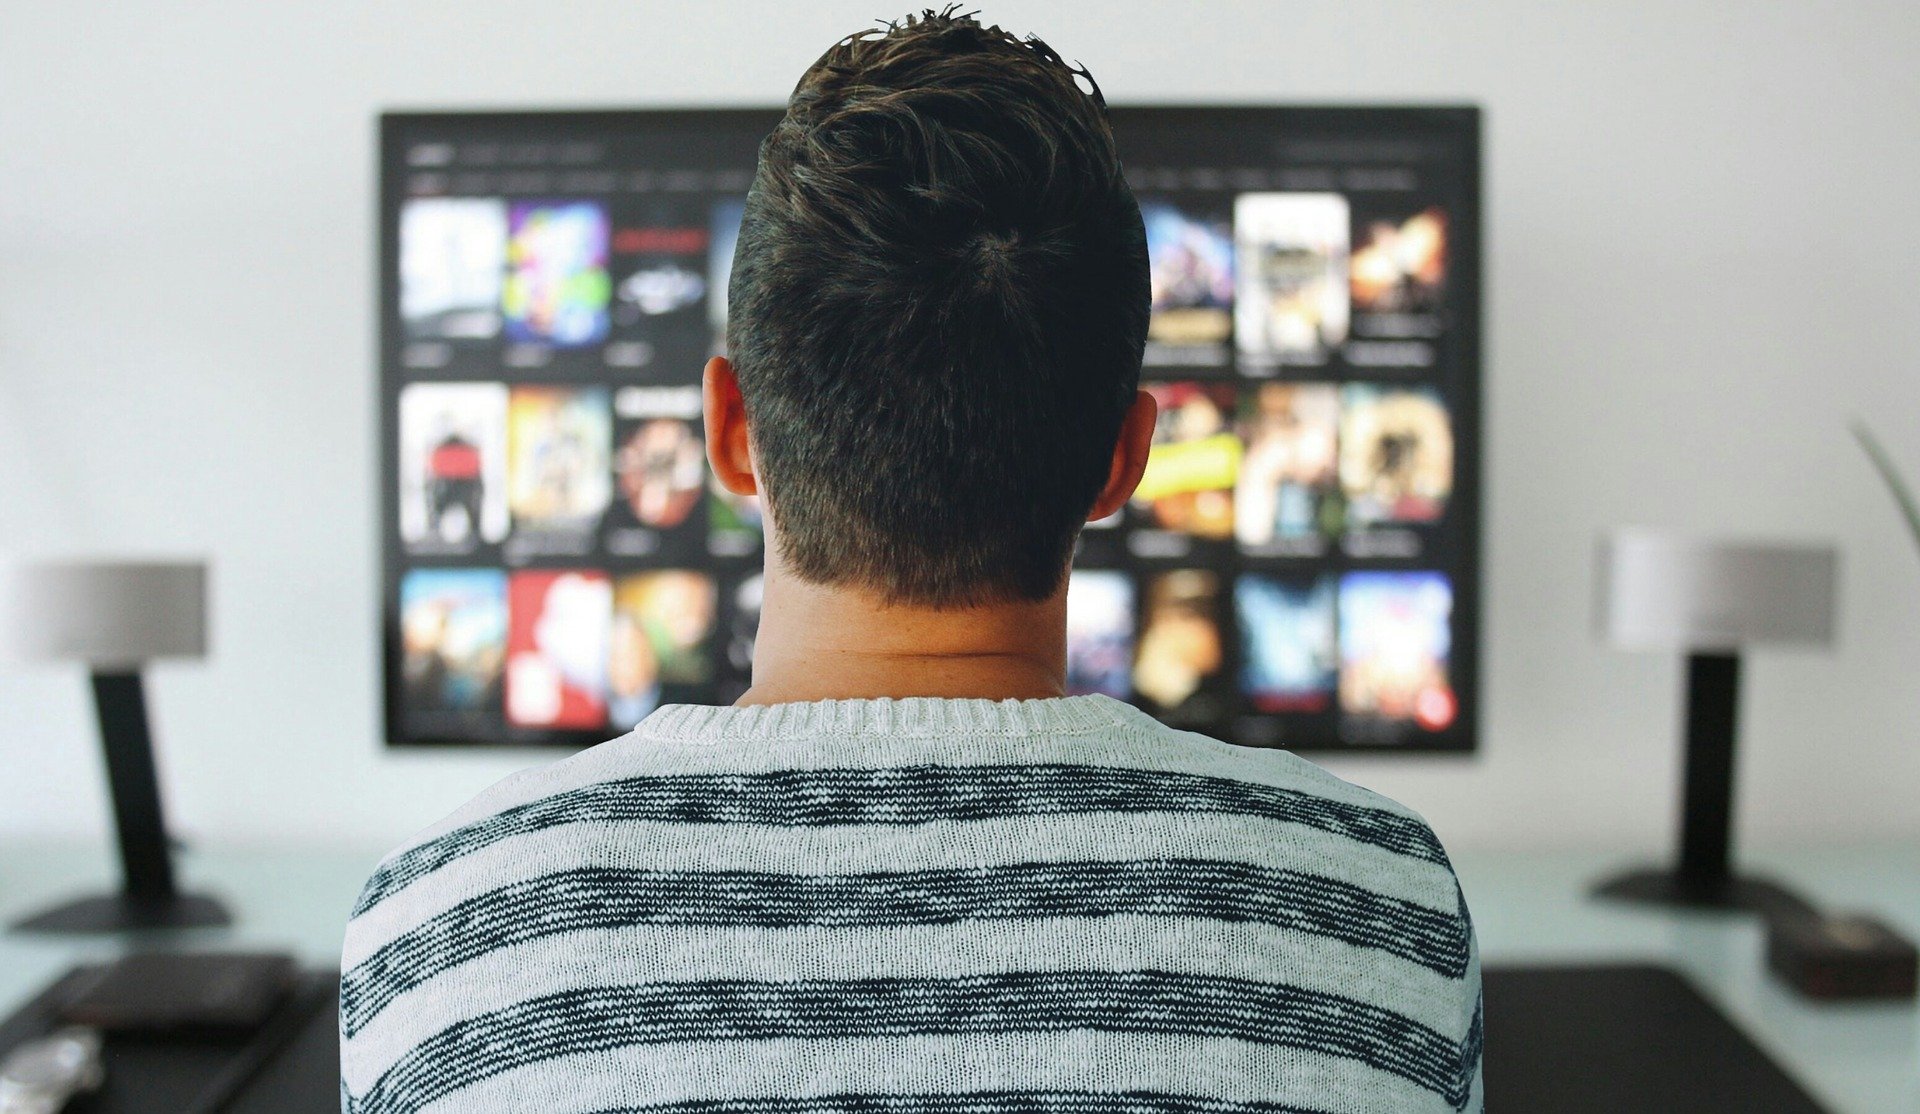 A photo of a person watching television.